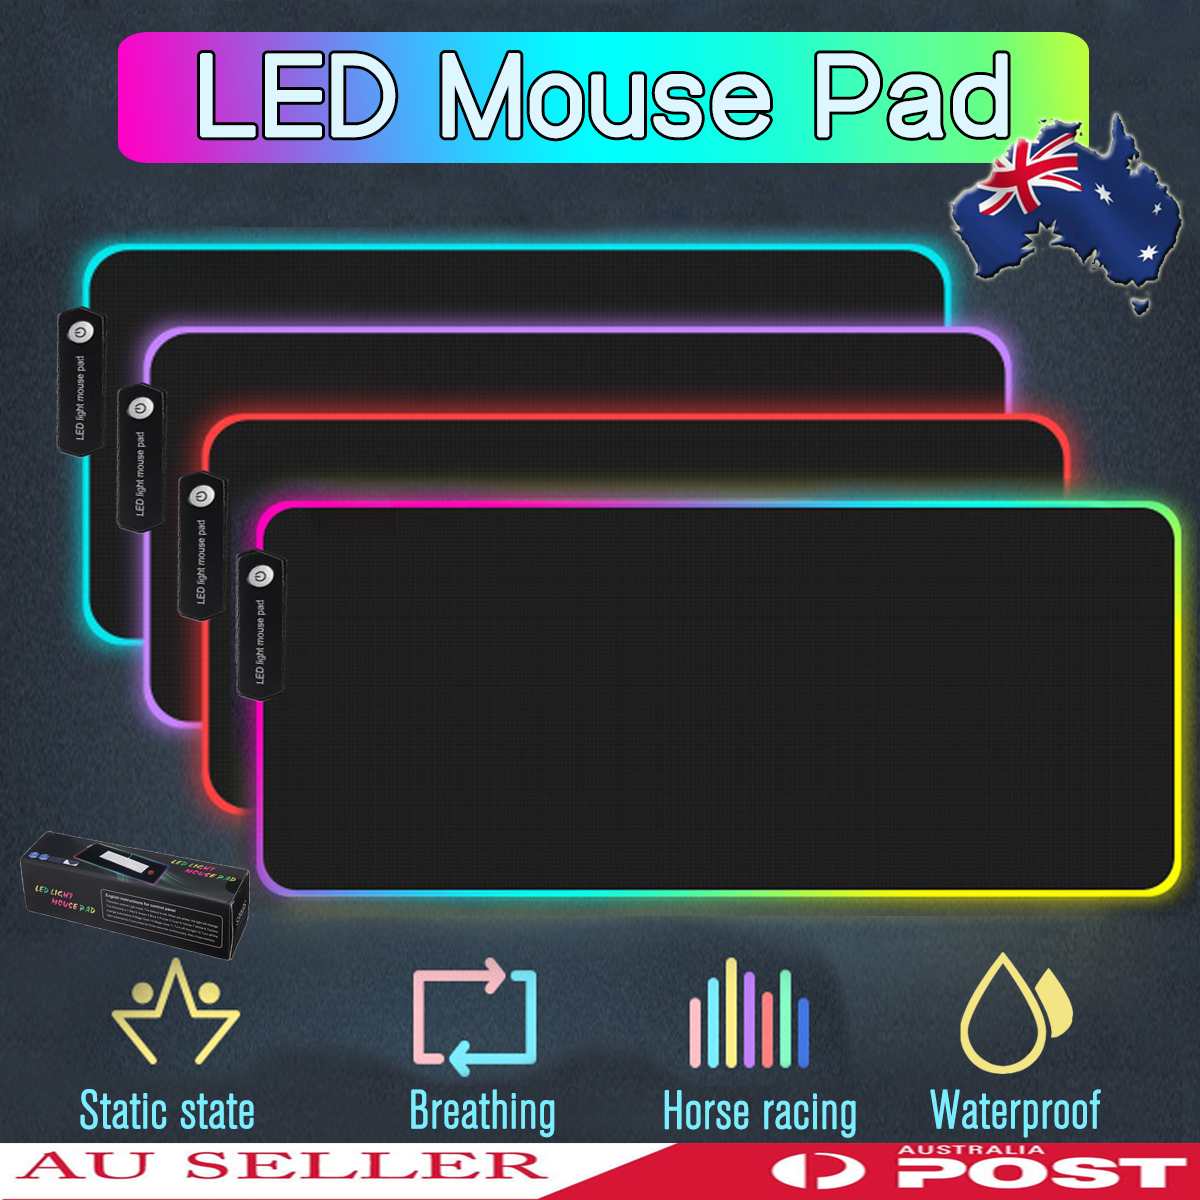 Metal Aluminum Mouse Pad Mat Hard Smooth Magic Thin Mousead Double Side  Waterproof Fast And Accurate Control For Office Home - Mouse Pads -  AliExpress